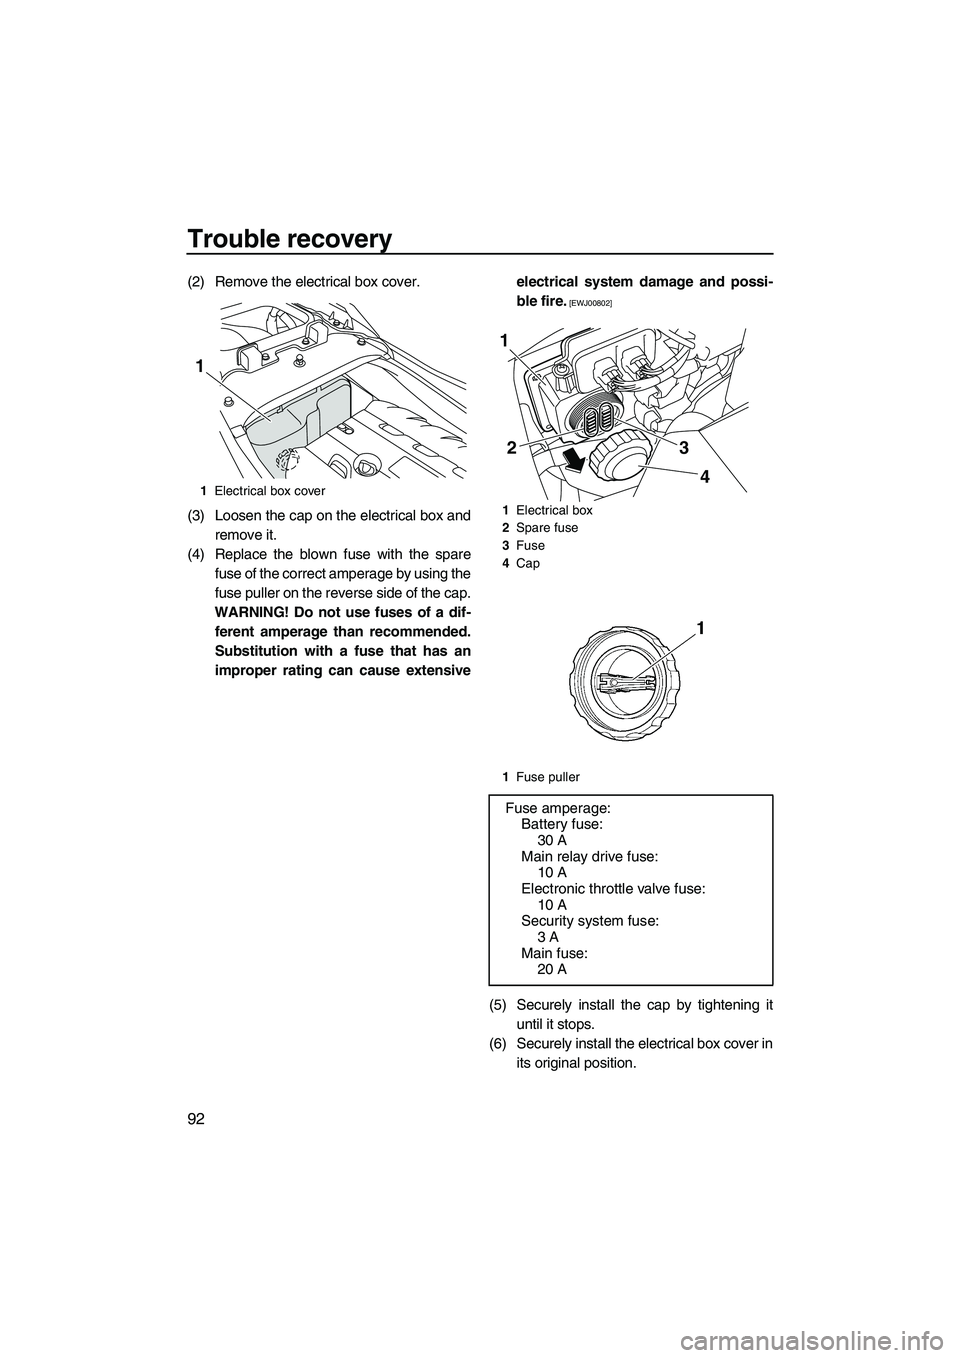 YAMAHA FZR 2012 Owners Guide Trouble recovery
92
(2) Remove the electrical box cover.
(3) Loosen the cap on the electrical box and
remove it.
(4) Replace the blown fuse with the spare
fuse of the correct amperage by using the
fus